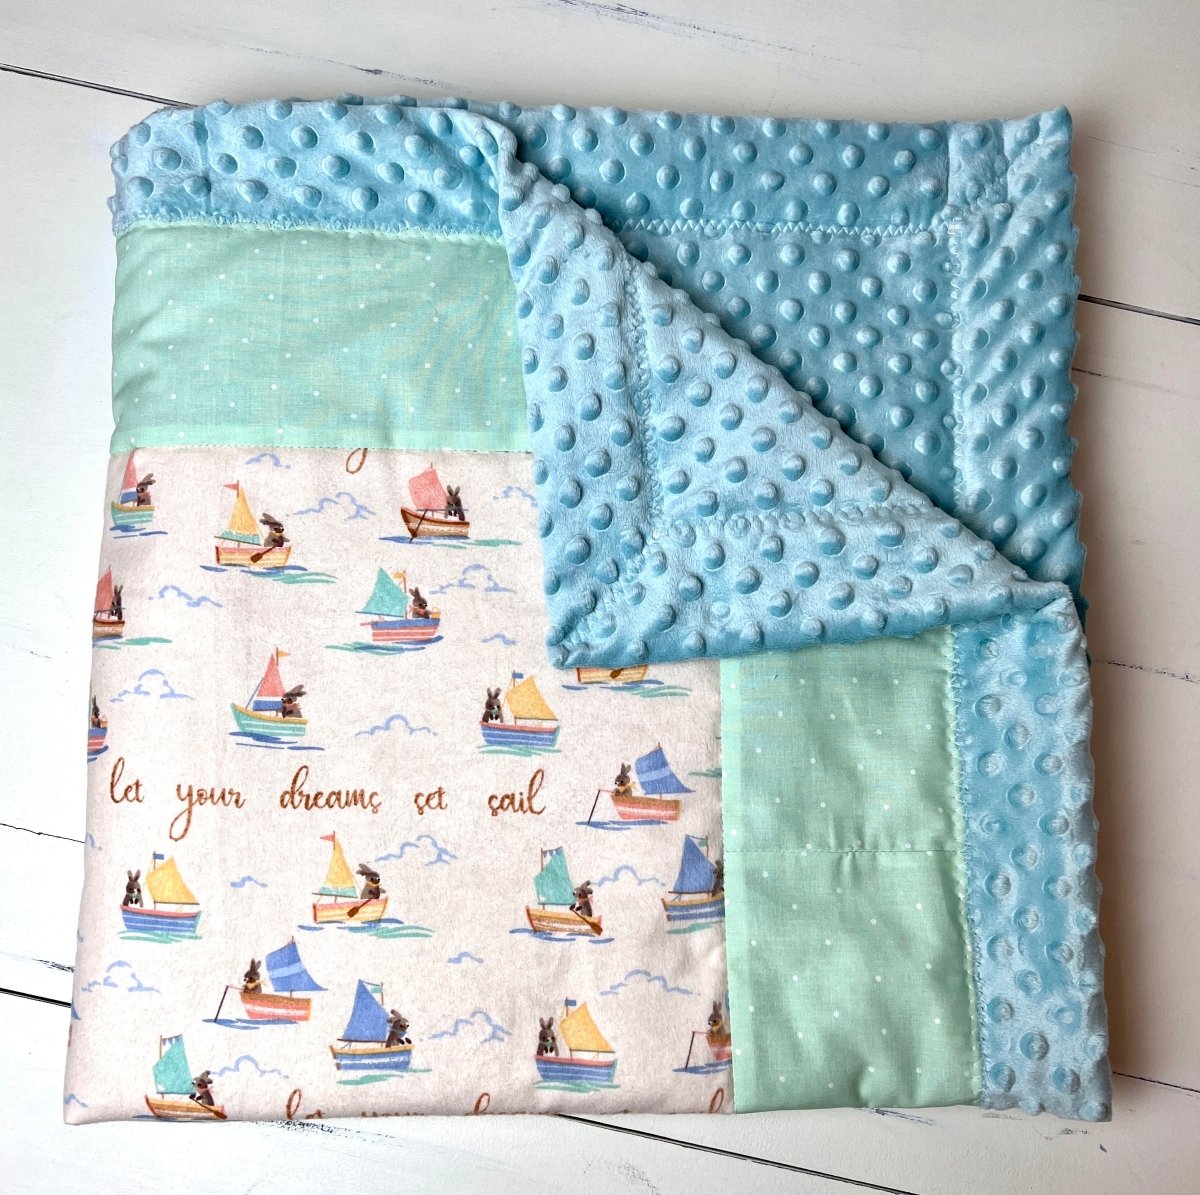 Baby Quilt- Boats and Bunnies - The Southern Nest